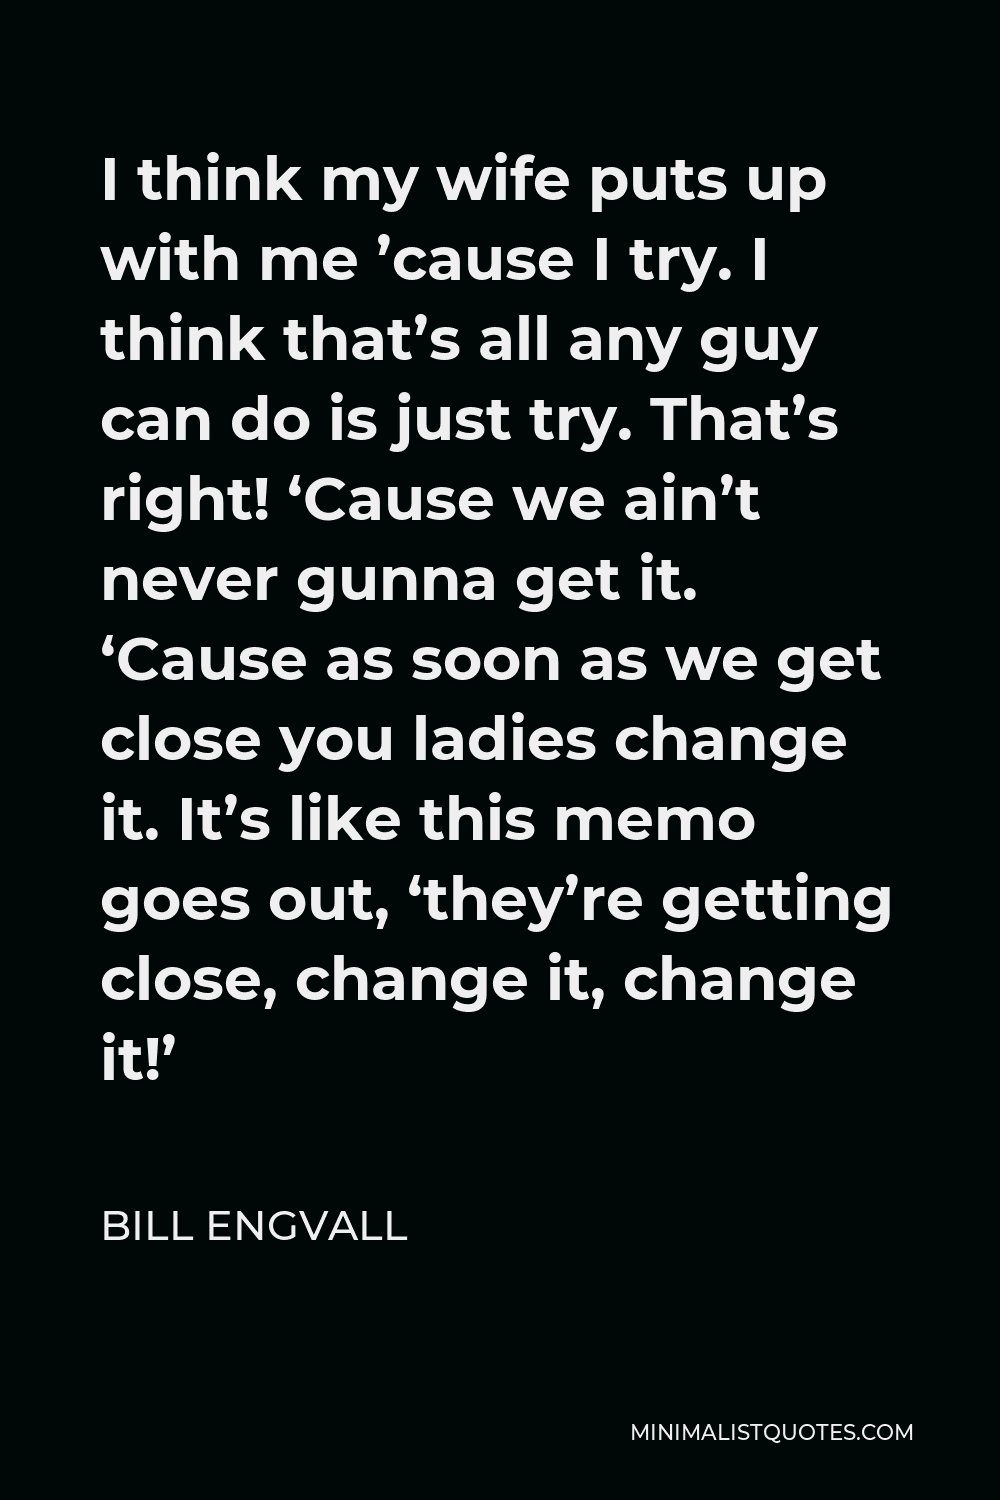 Bill Engvall Quote - I think my wife puts up with me ’cause I try. I think that’s all any guy can do is just try. That’s right! ‘Cause we ain’t never gunna get it. ‘Cause as soon as we get close you ladies change it. It’s like this memo goes out, ‘they’re getting close, change it, change it!’